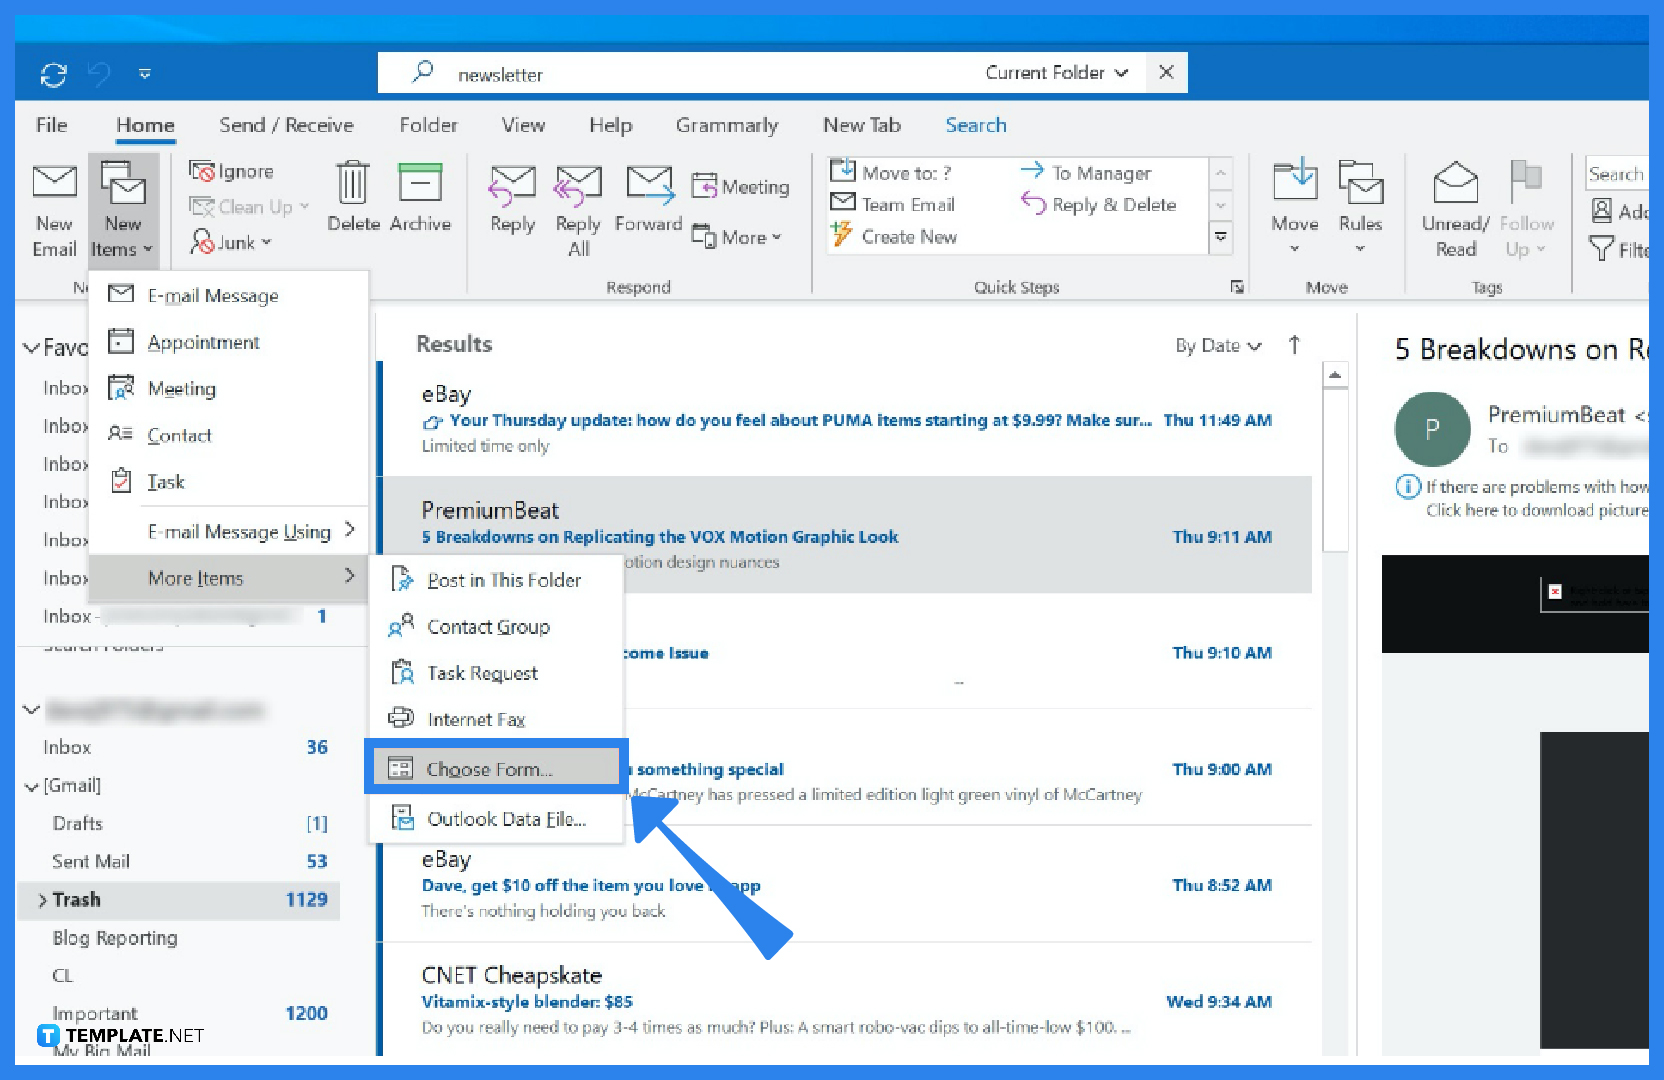 How to Start a Newsletter with Microsoft Outlook - Step 3